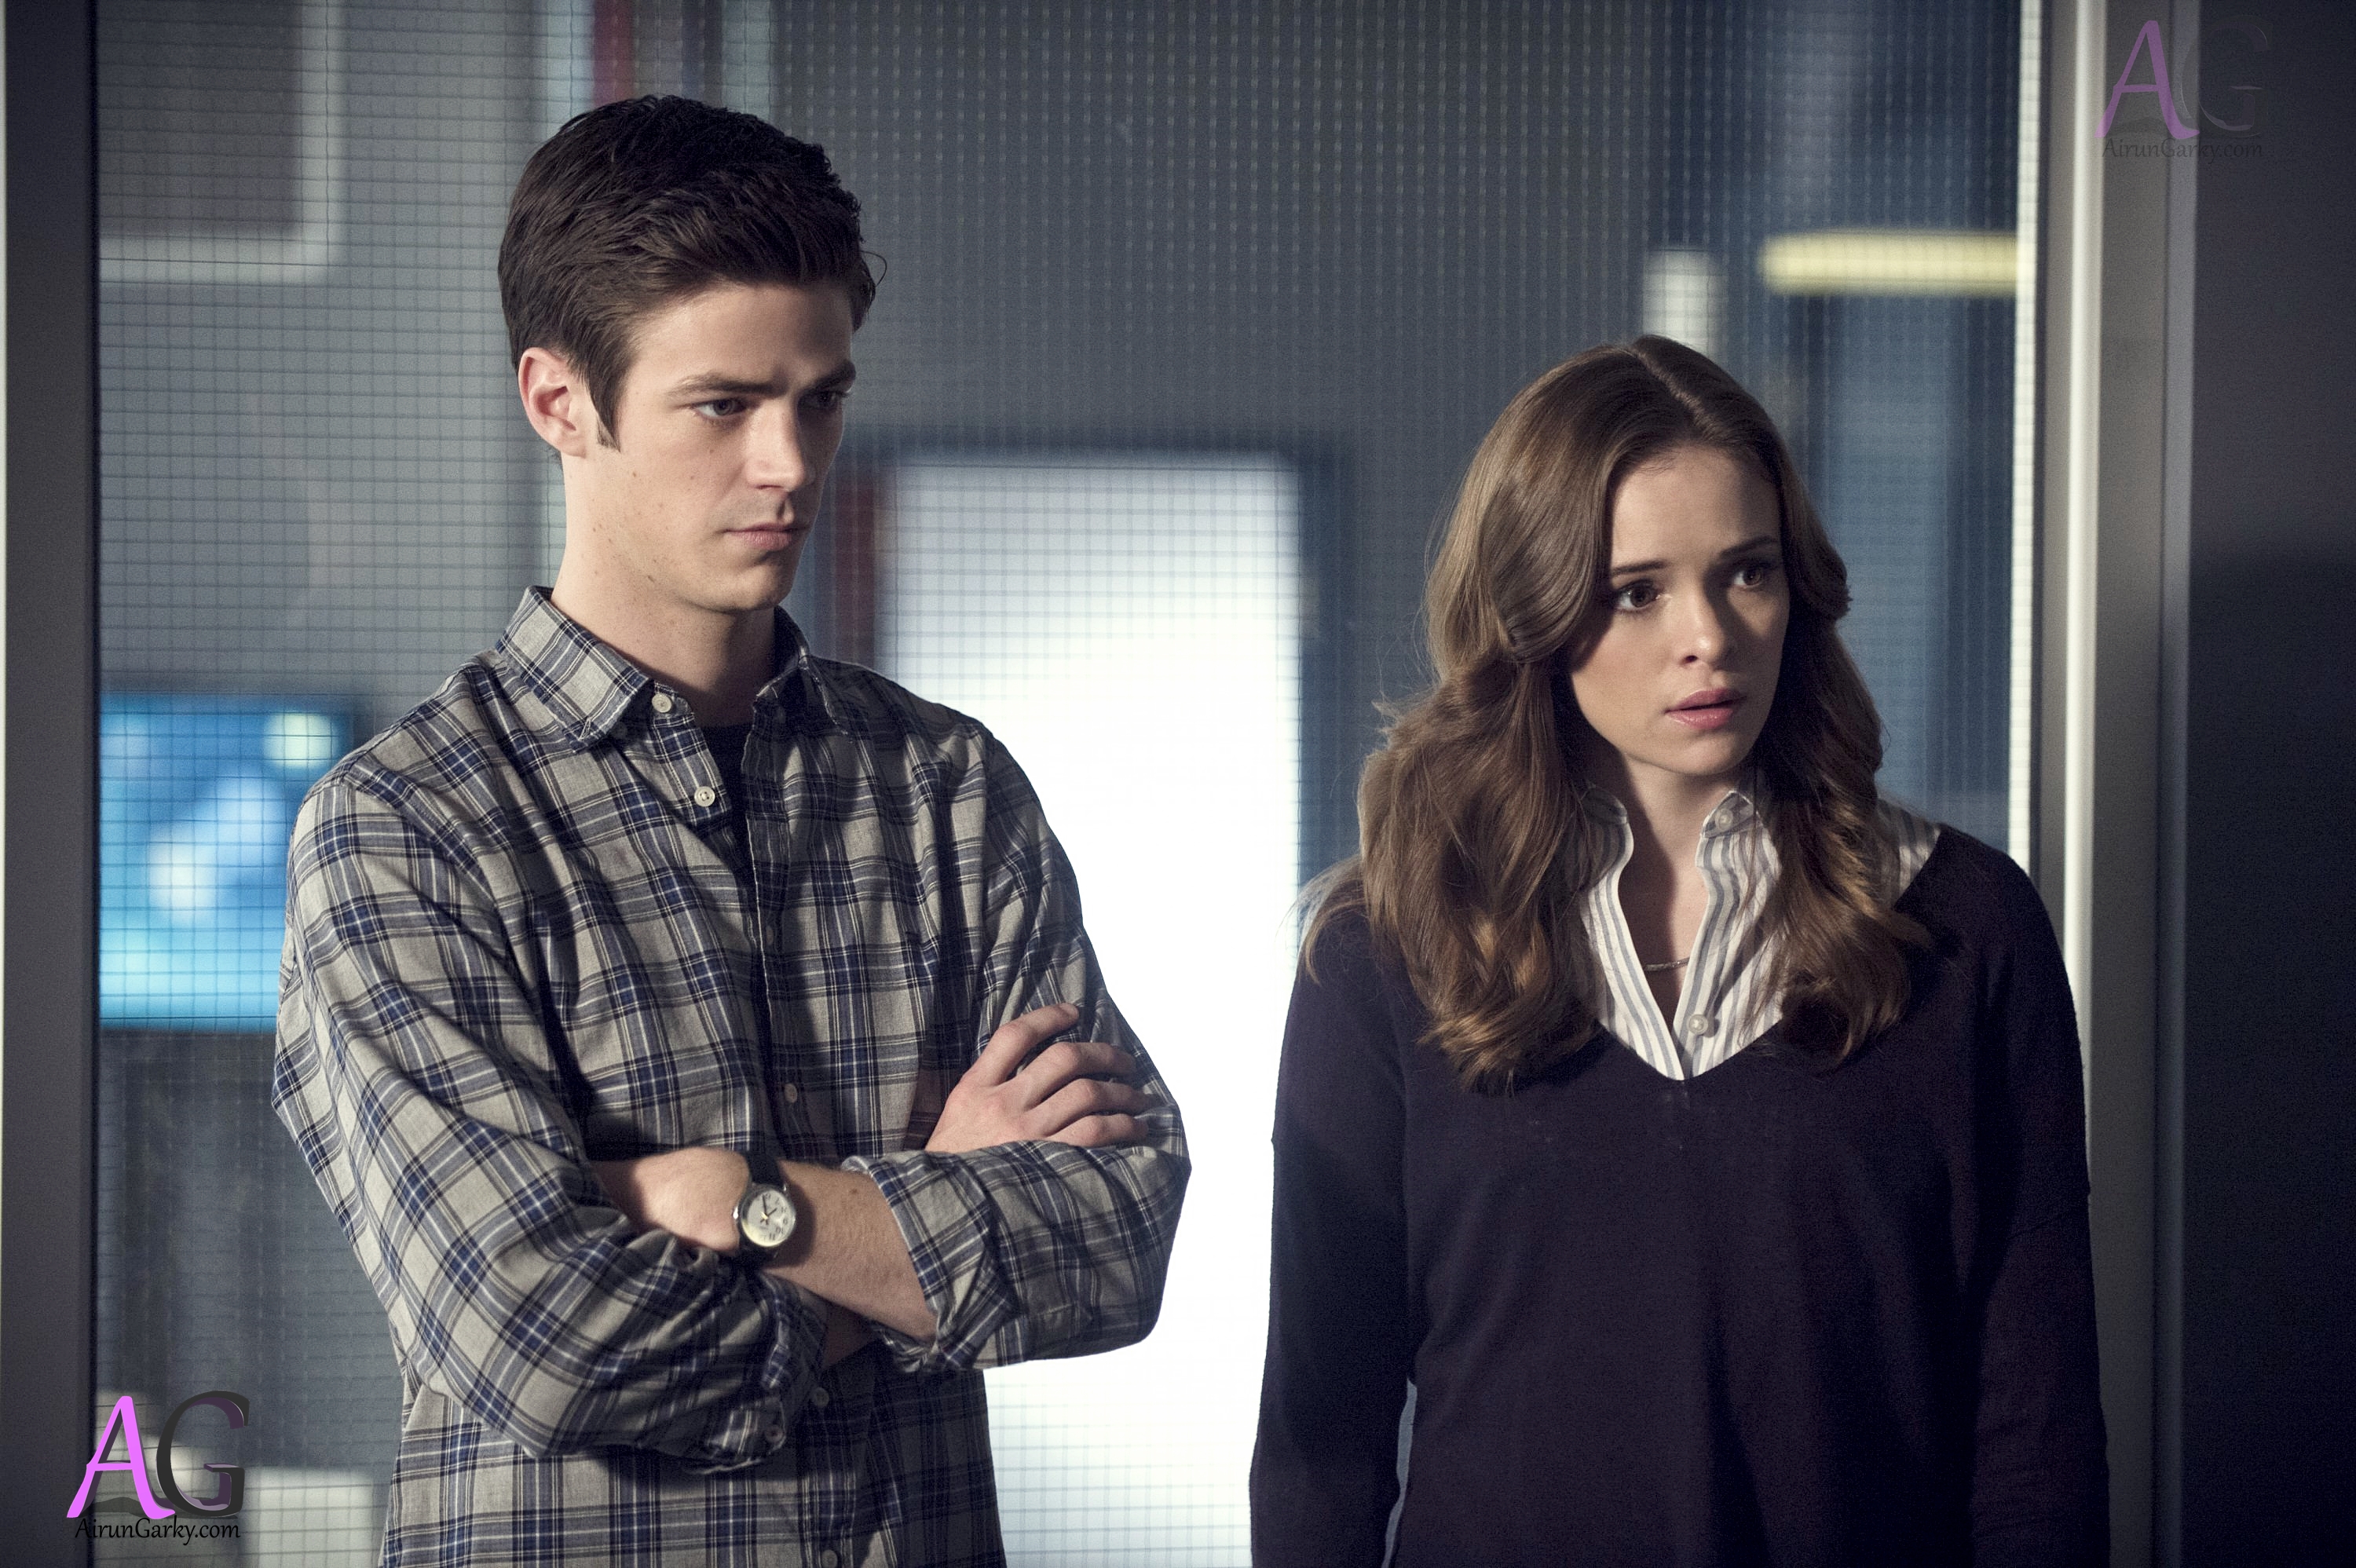 Danielle Panabaker in The Flash